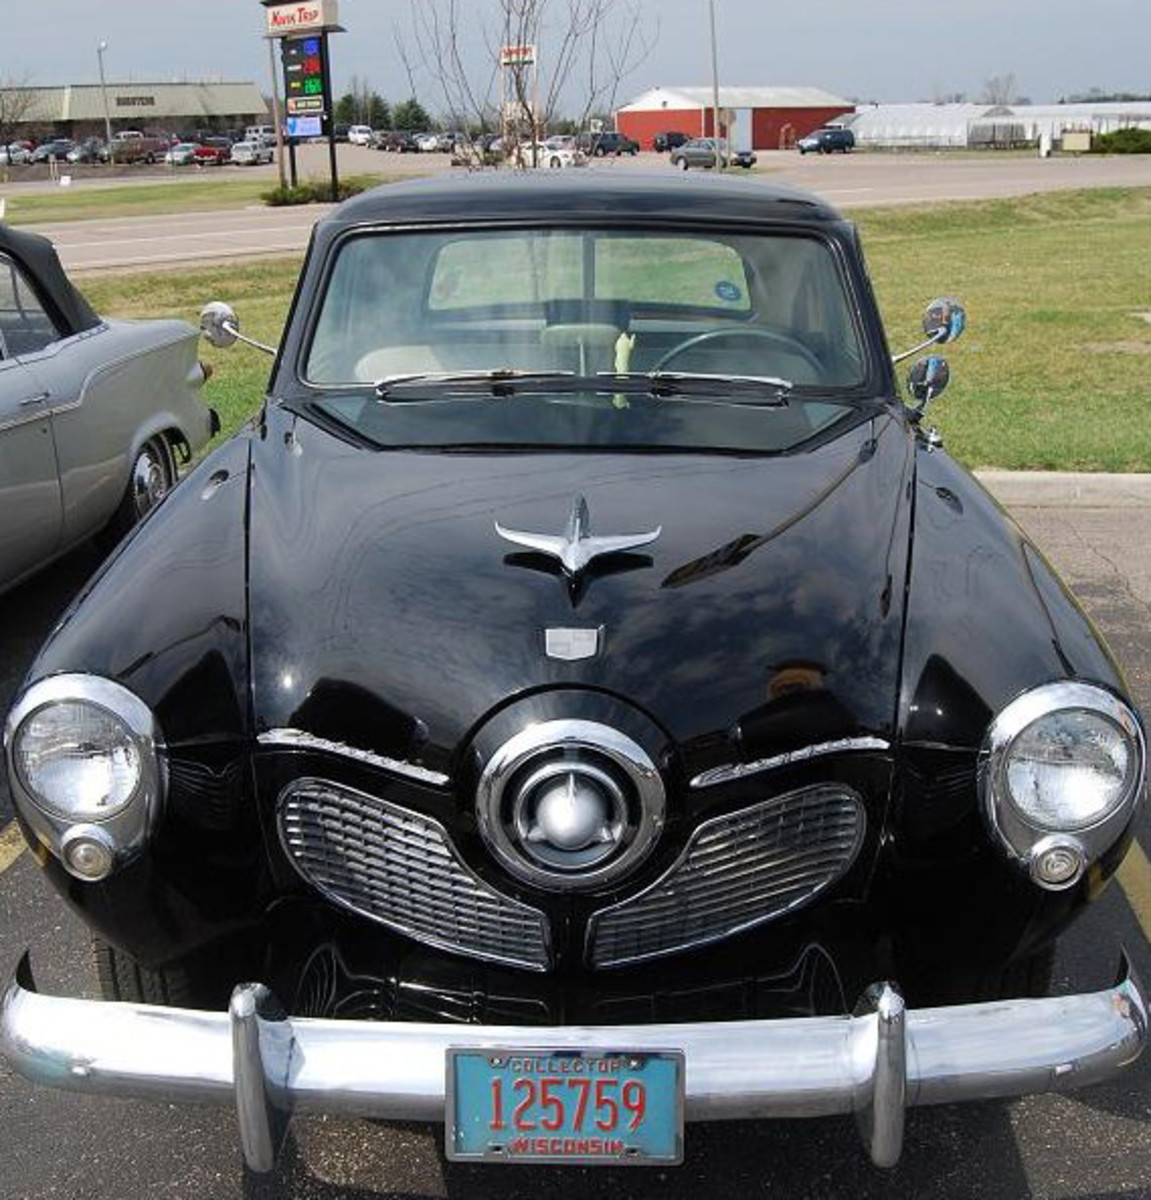 Our favorite car at the Studebaker Spring Meeting was this 1950 Champion coupe.